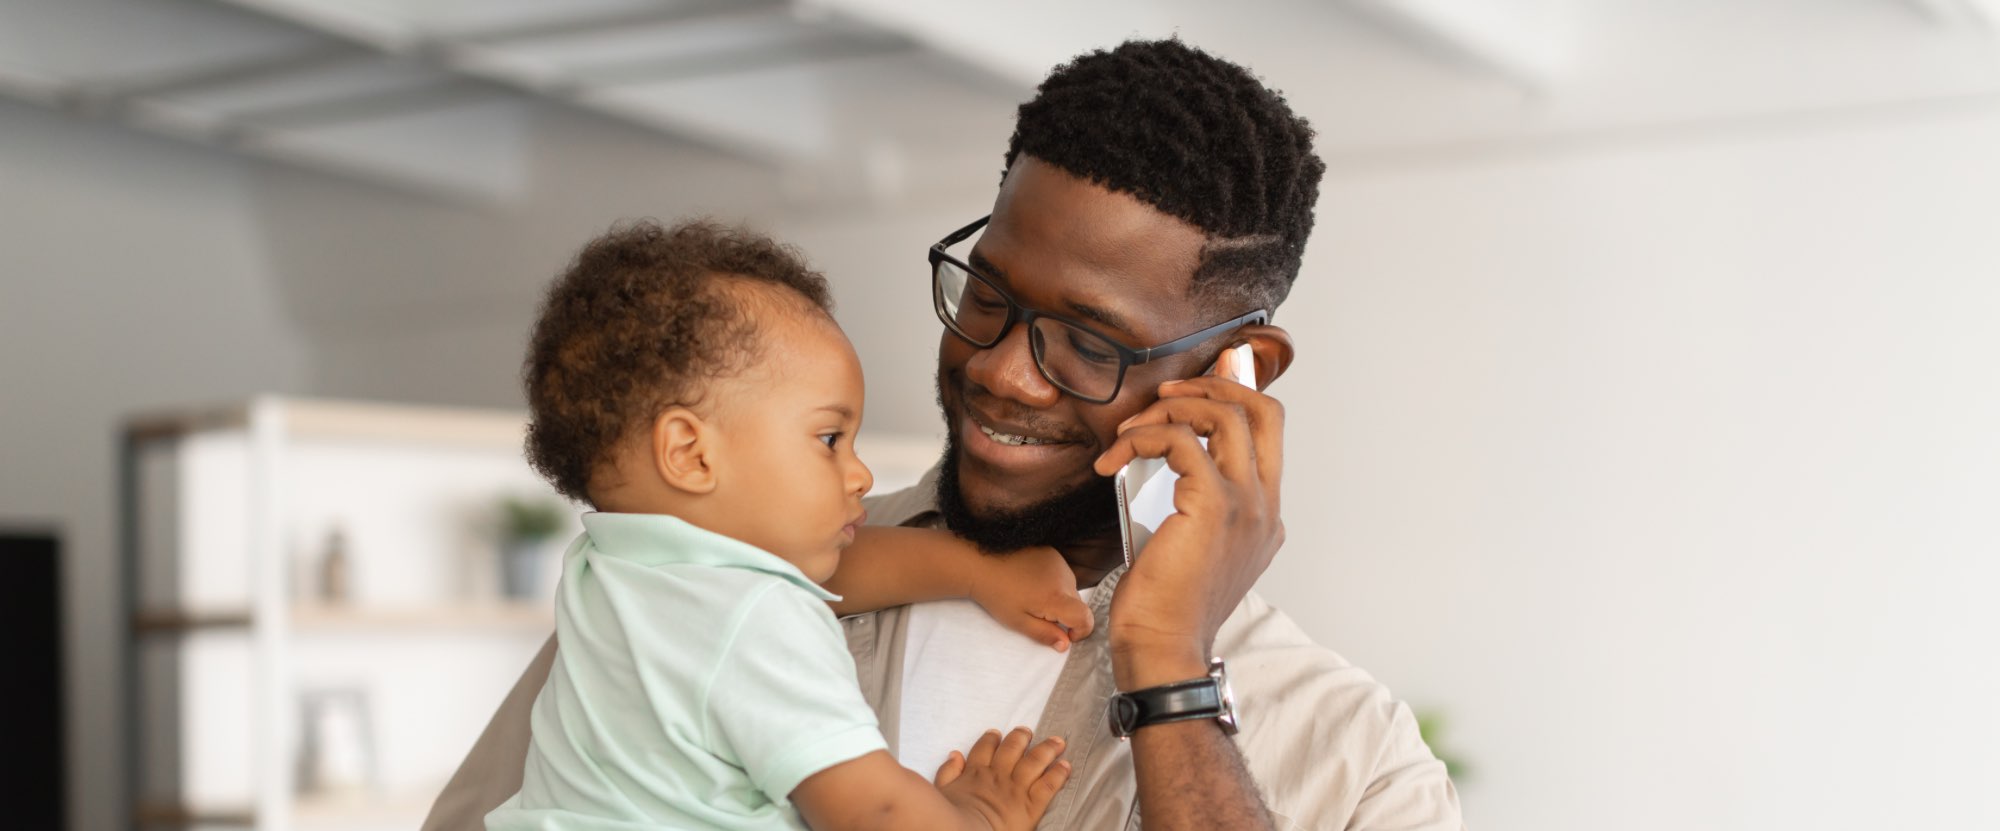 A black man on the phone, smiling and holding a small baby